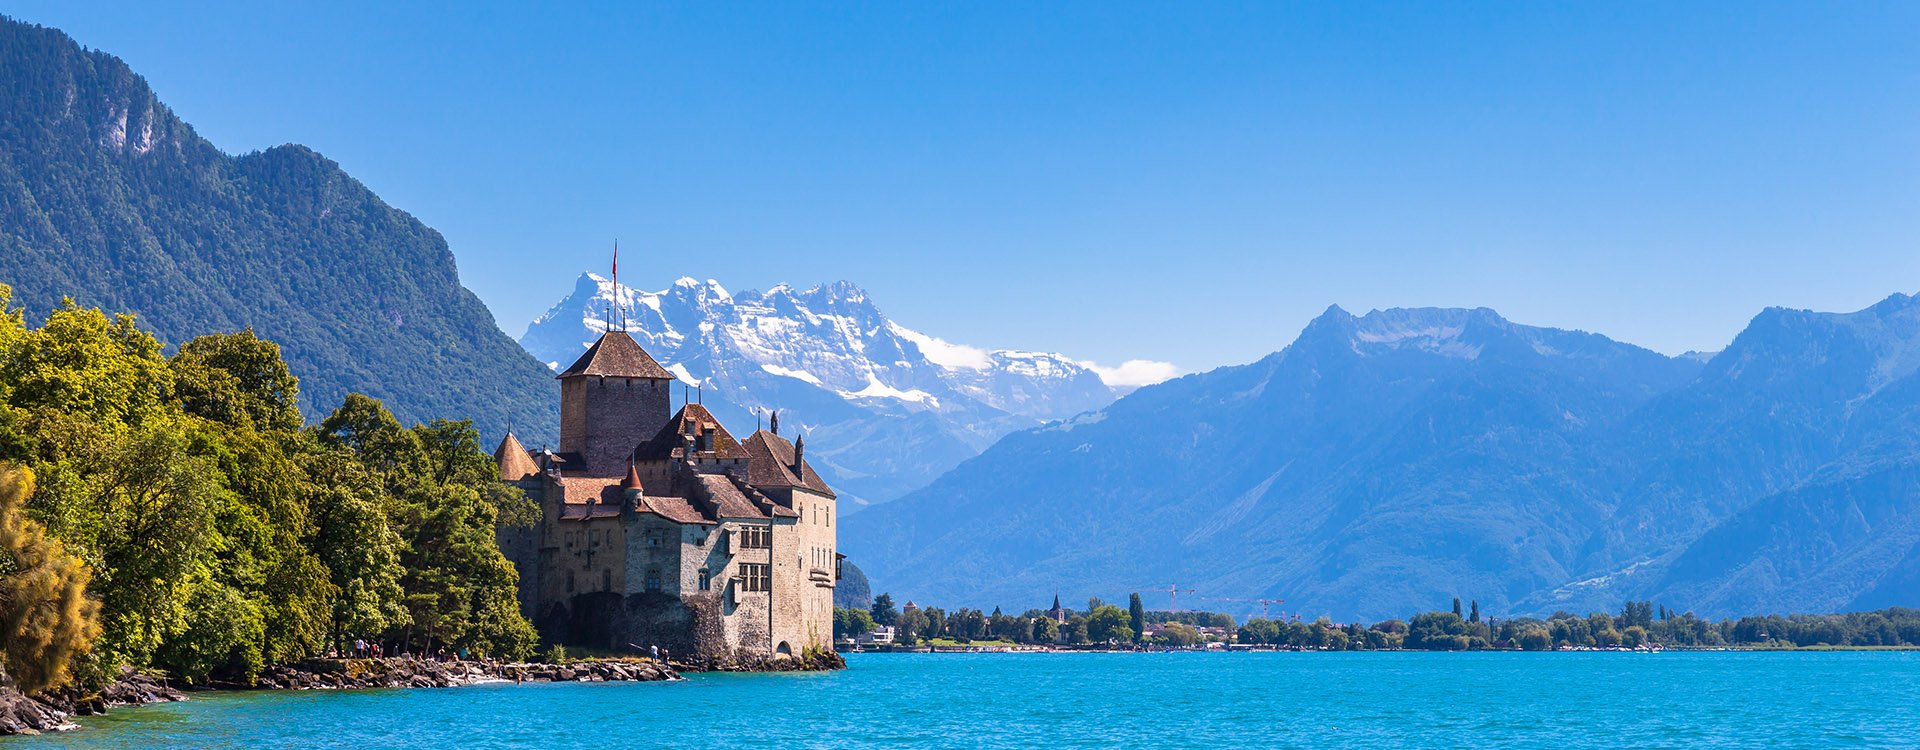 Chillon castle on the lake side of Geneva lake, with the peaks Dents du Midi of Swiss Alps in background, Montreux, Canton of Vaud, Switzerland